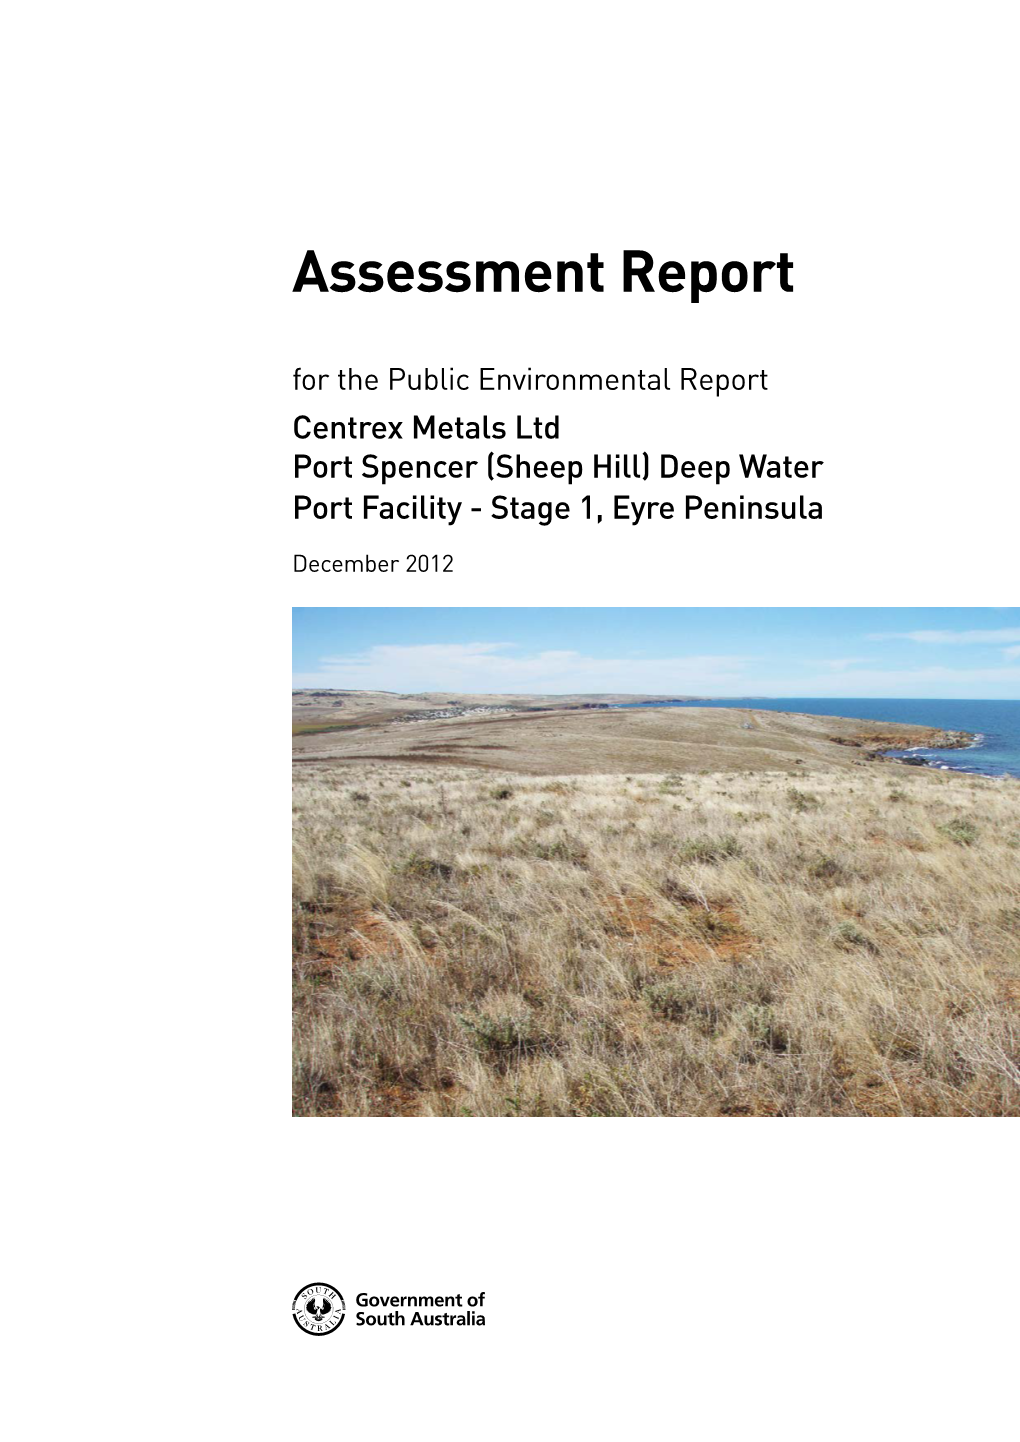 Assessment Report for the Public Environmental Report Centrex Metals Ltd Port Spencer (Sheep Hill) Deep Water Port Facility - Stage 1, Eyre Peninsula